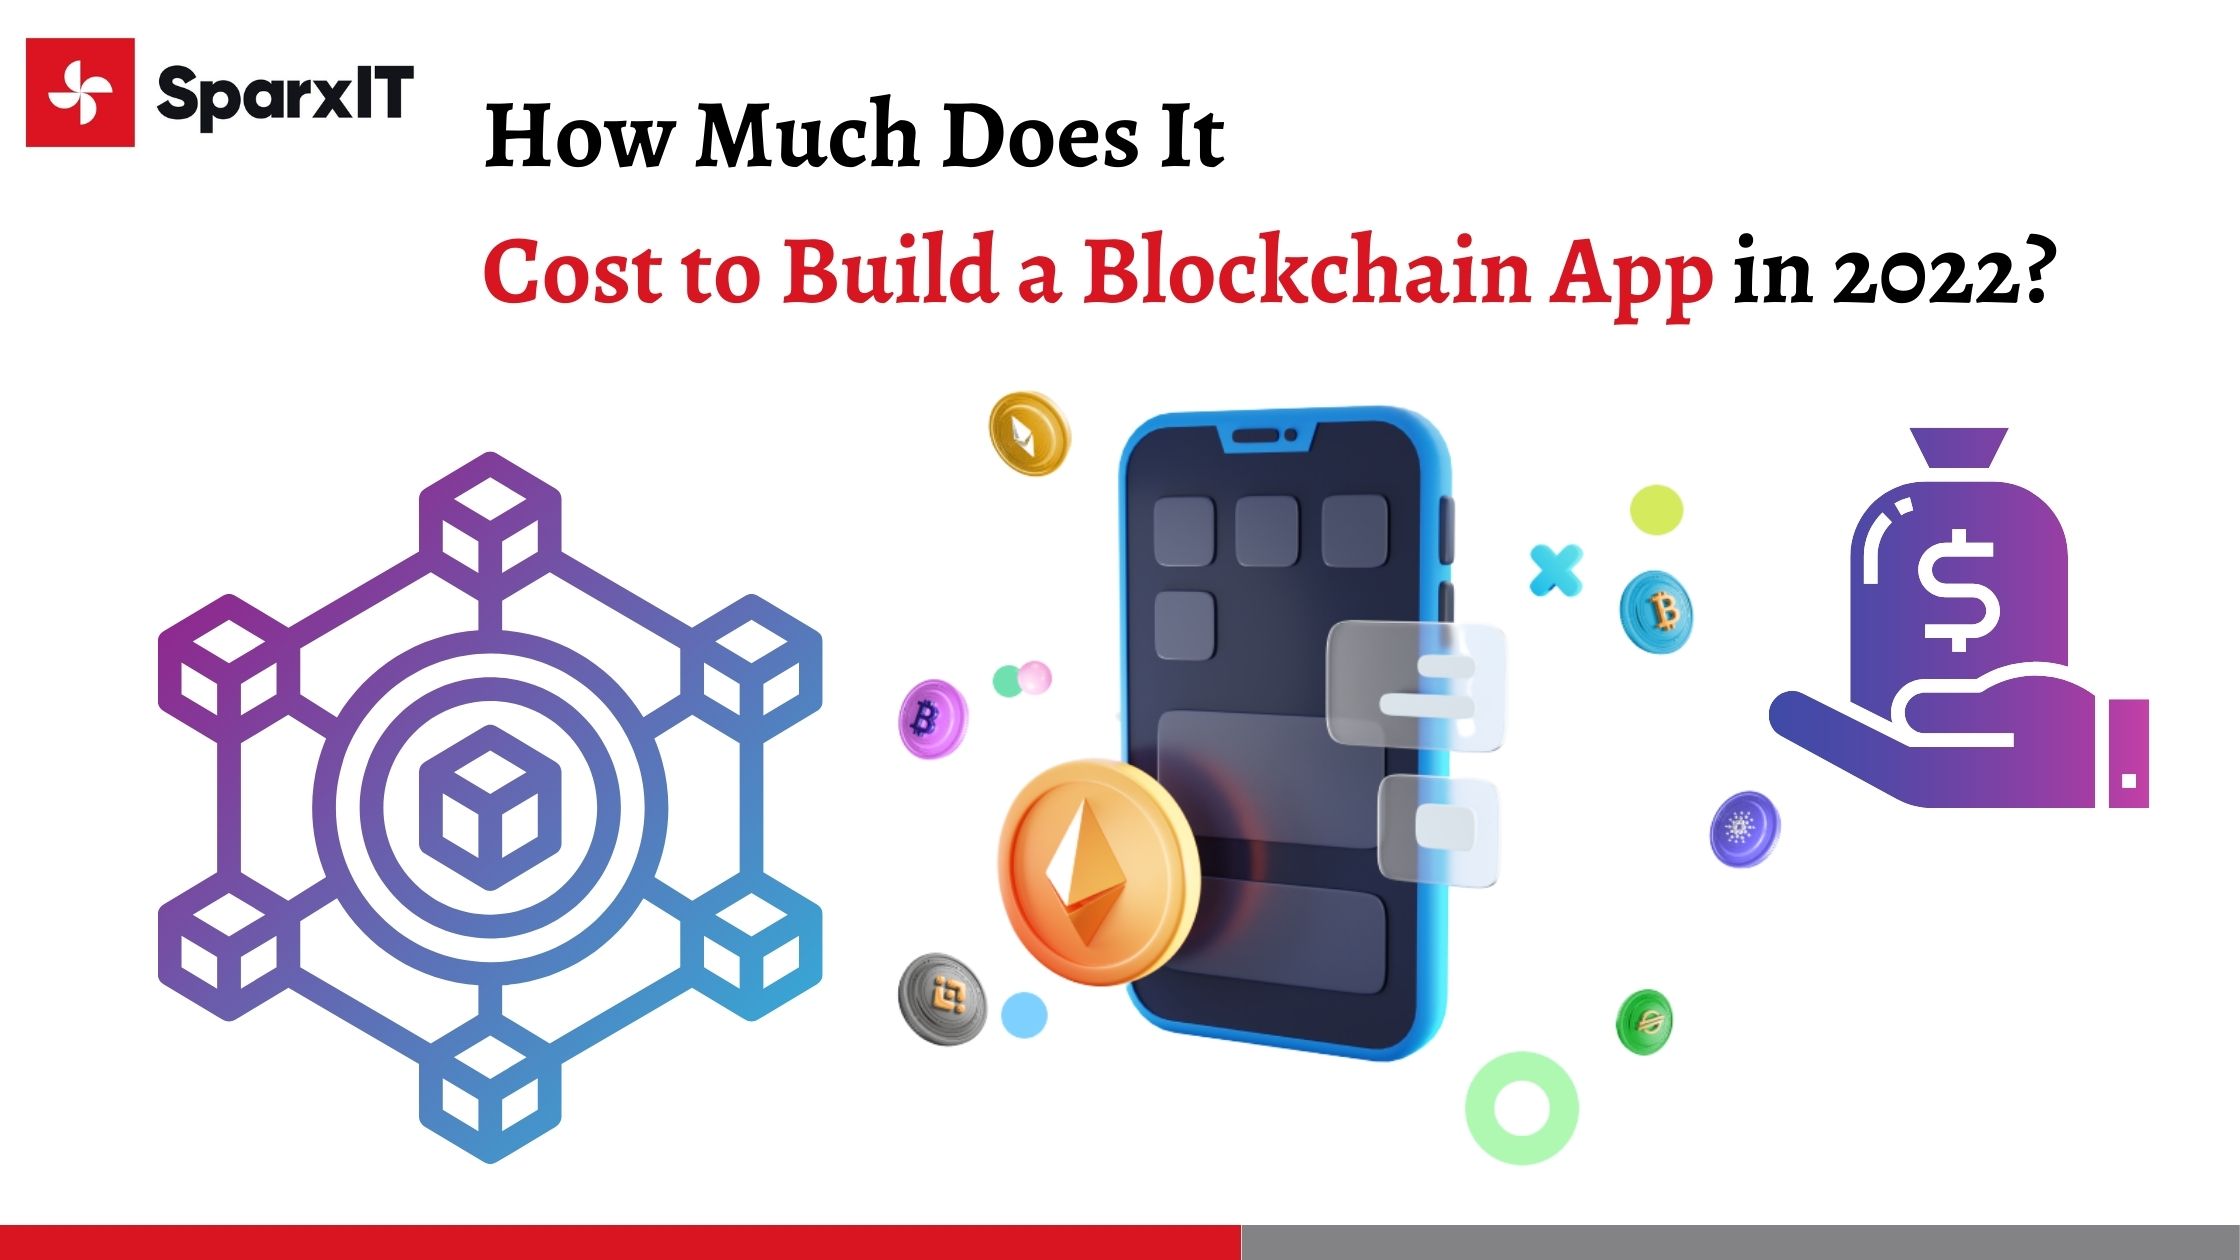 How Much Does It Cost to Build a Blockchain App in 2022?